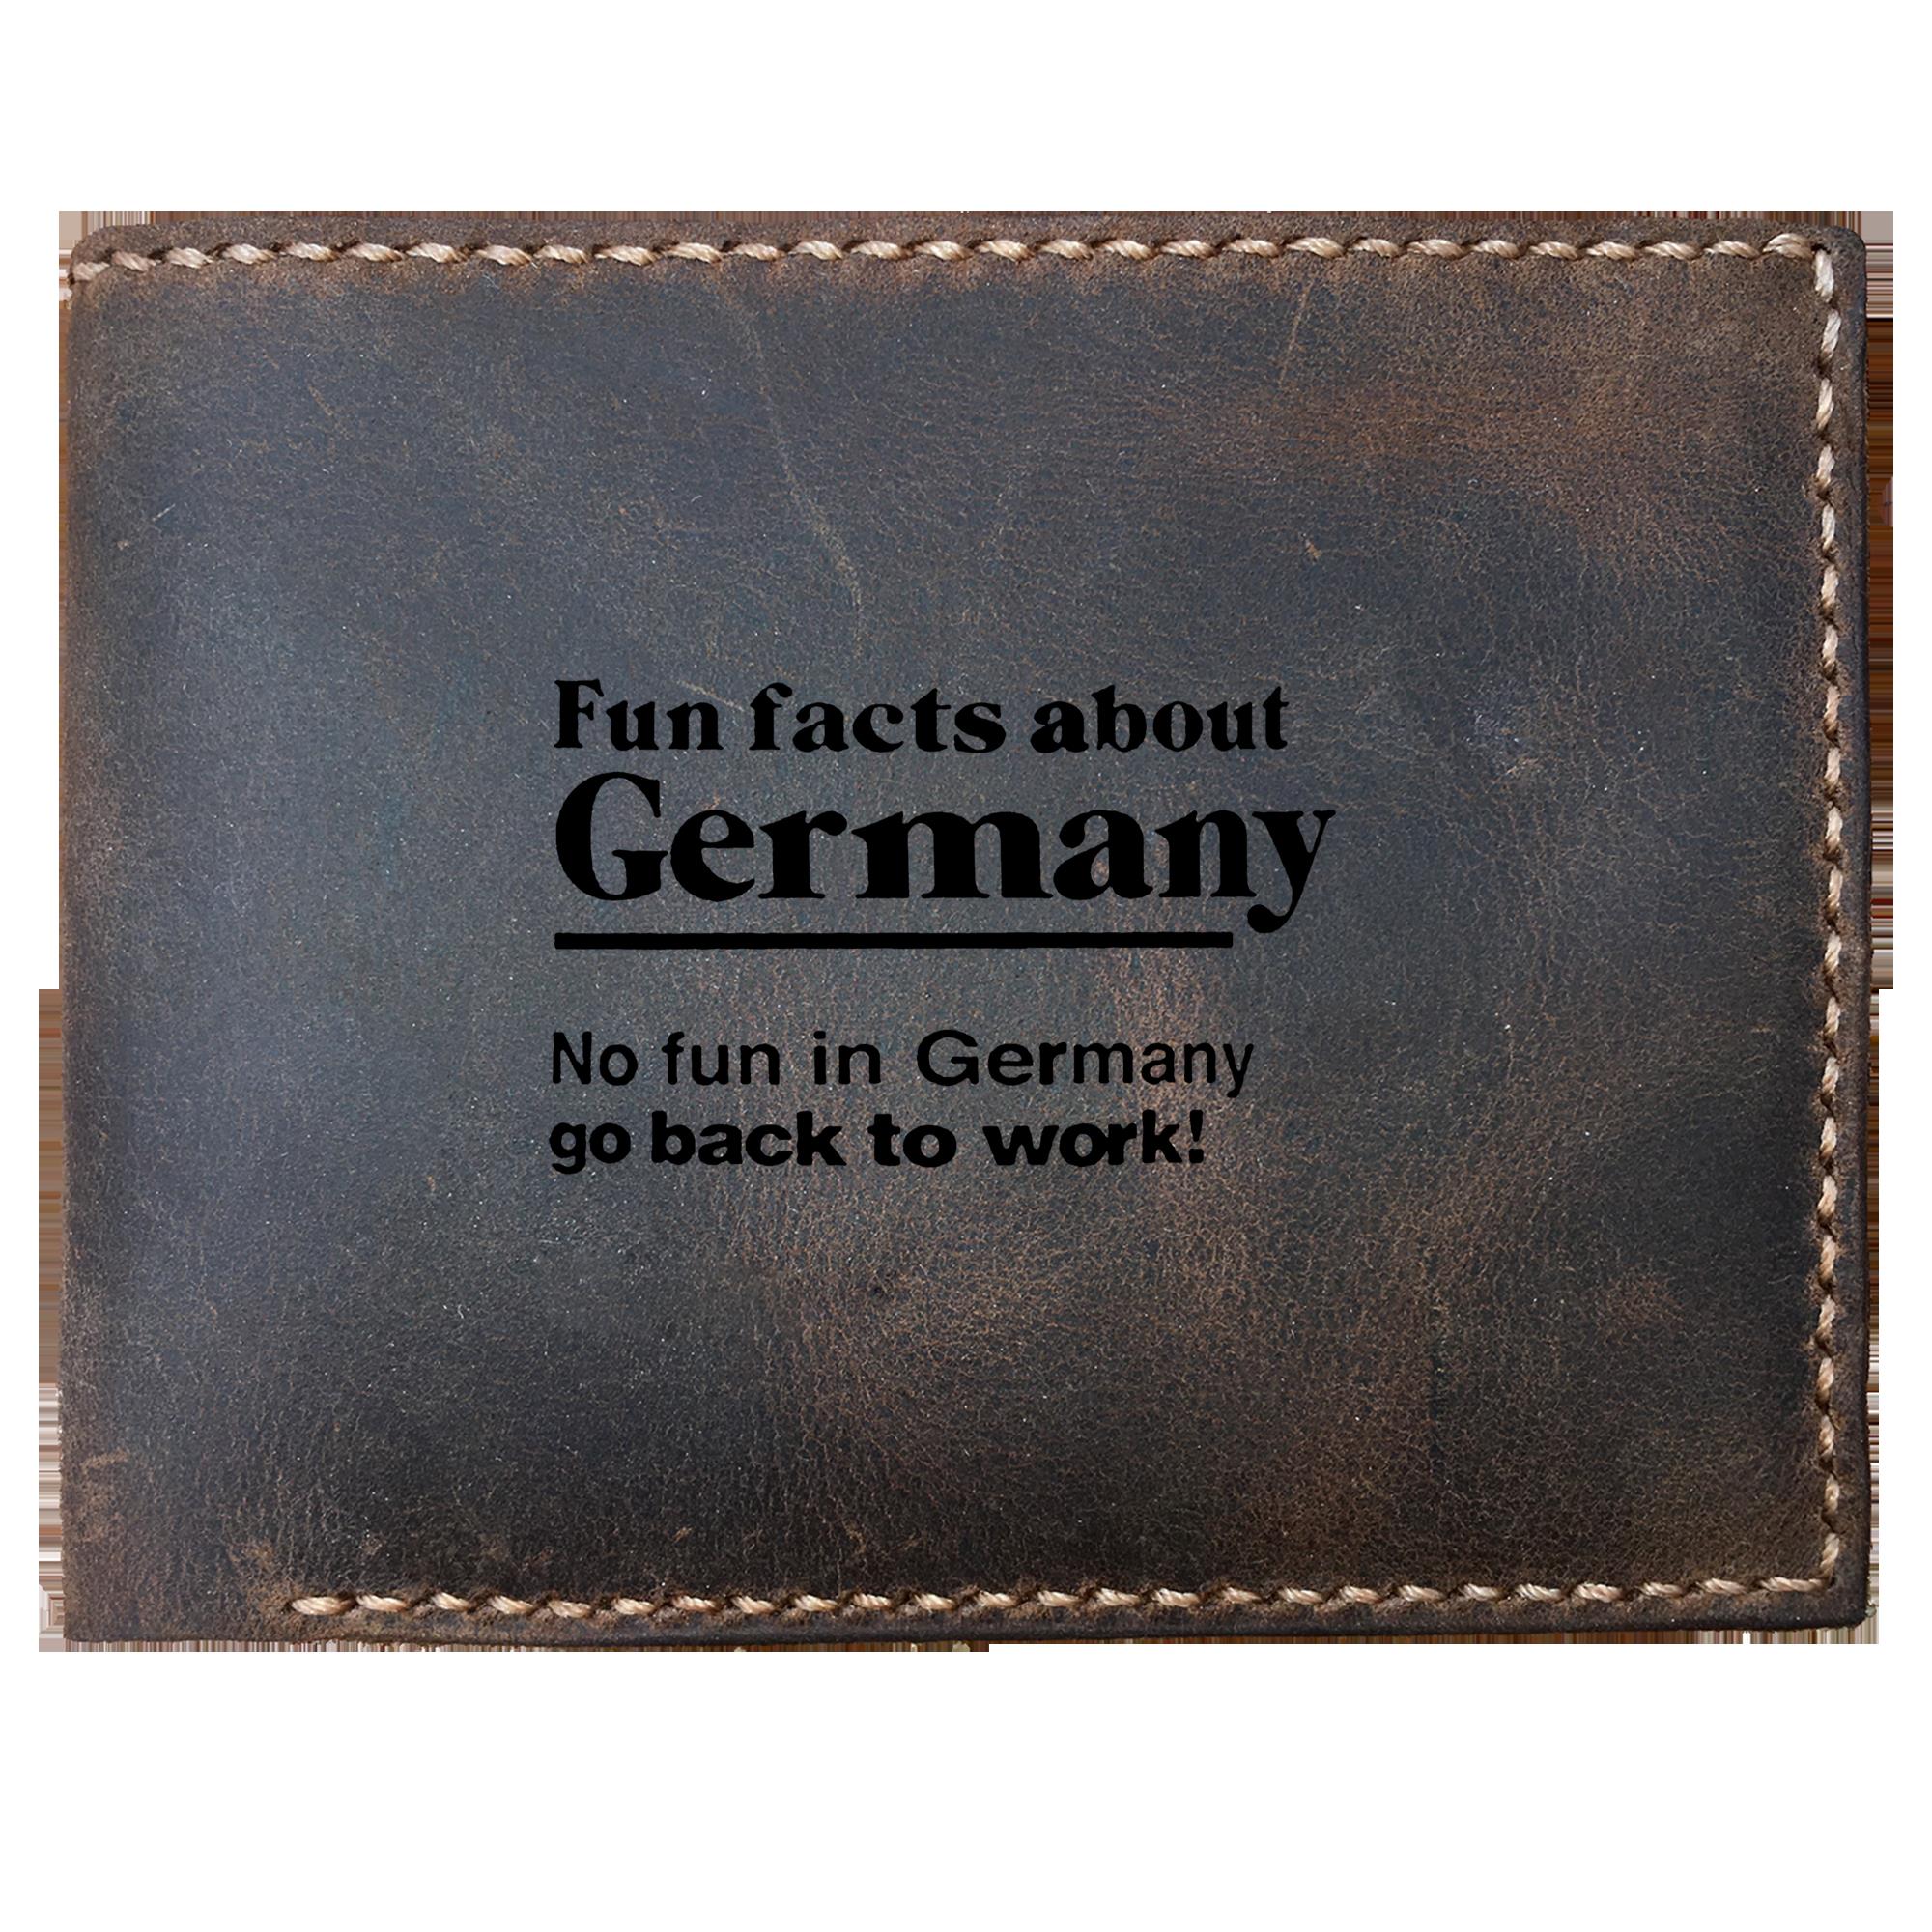 Skitongifts Funny Custom Laser Engraved Bifold Leather Wallet For Men, Fun Facts About Germany No Fun In Germany Go Back To Work Ver1